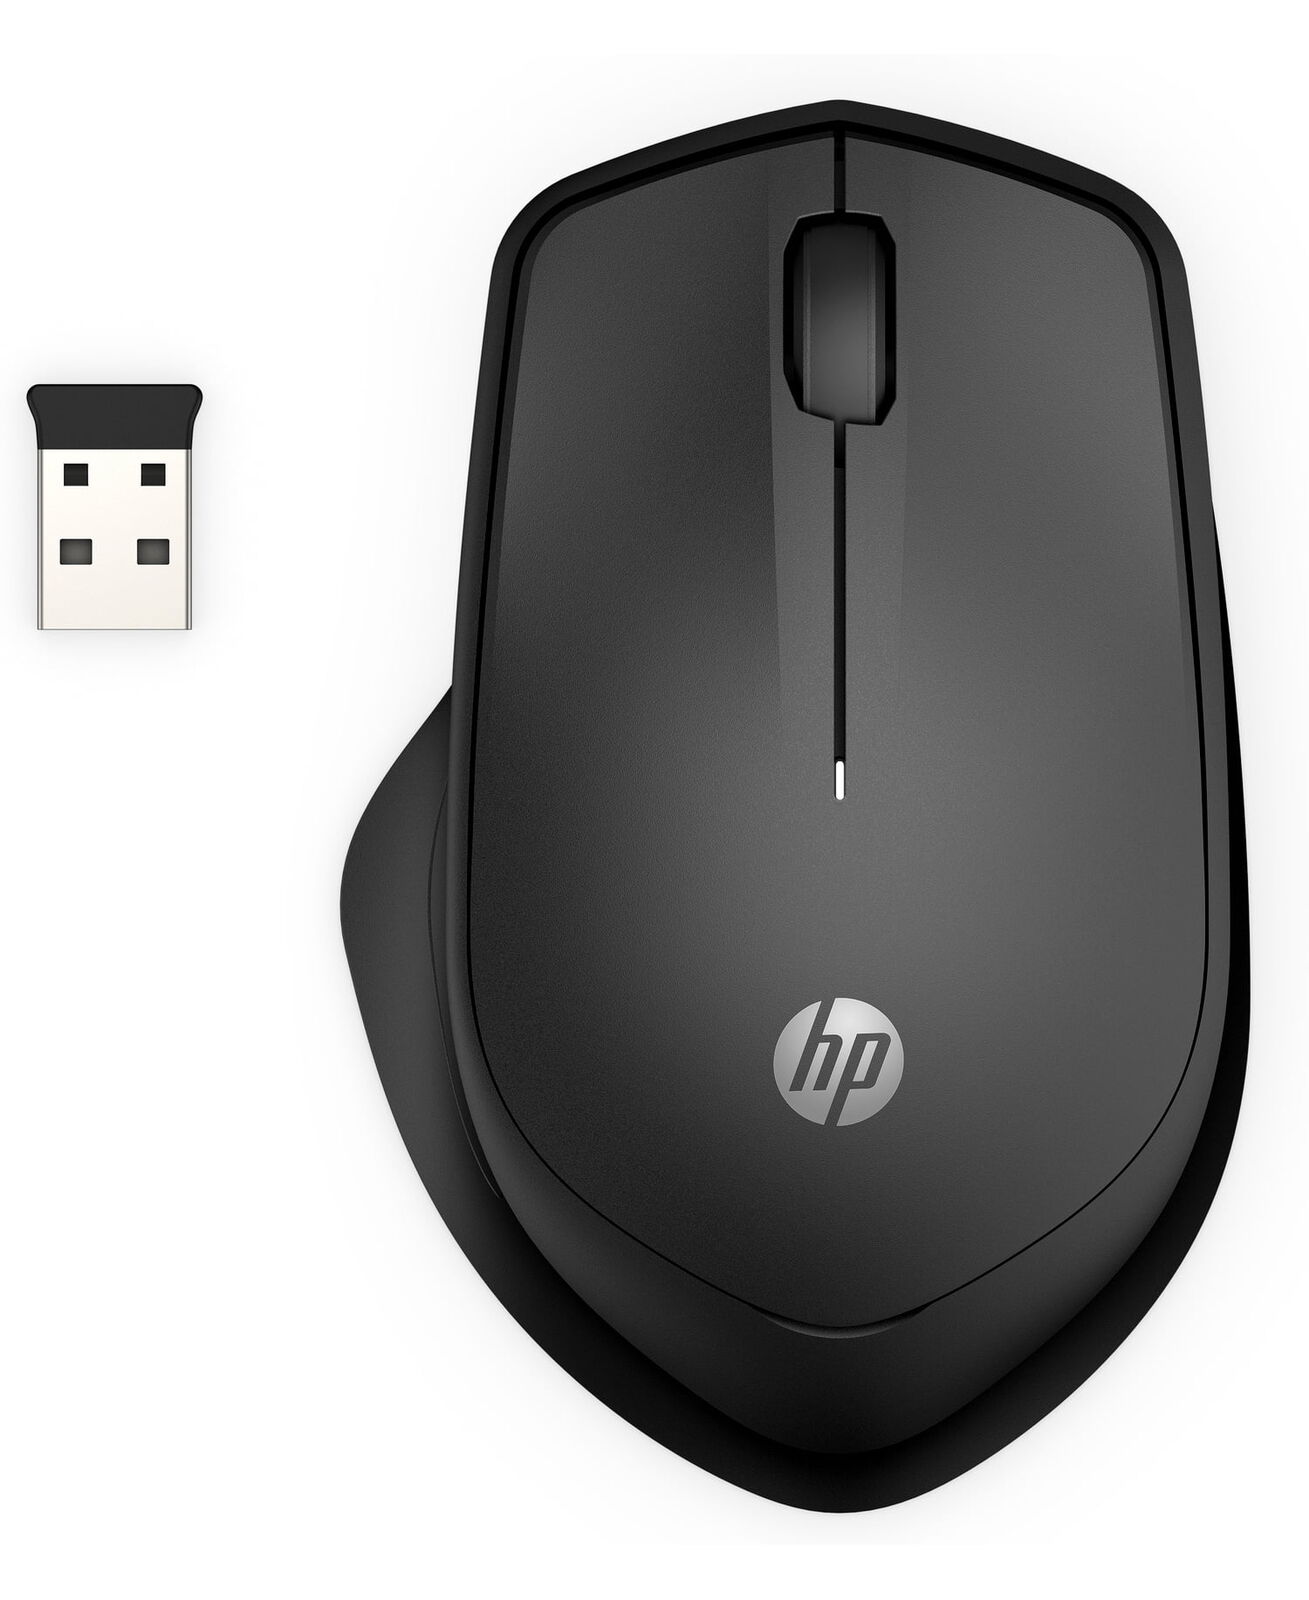 HP 280 Silent Wireless Mouse (19U64AA#ABL)